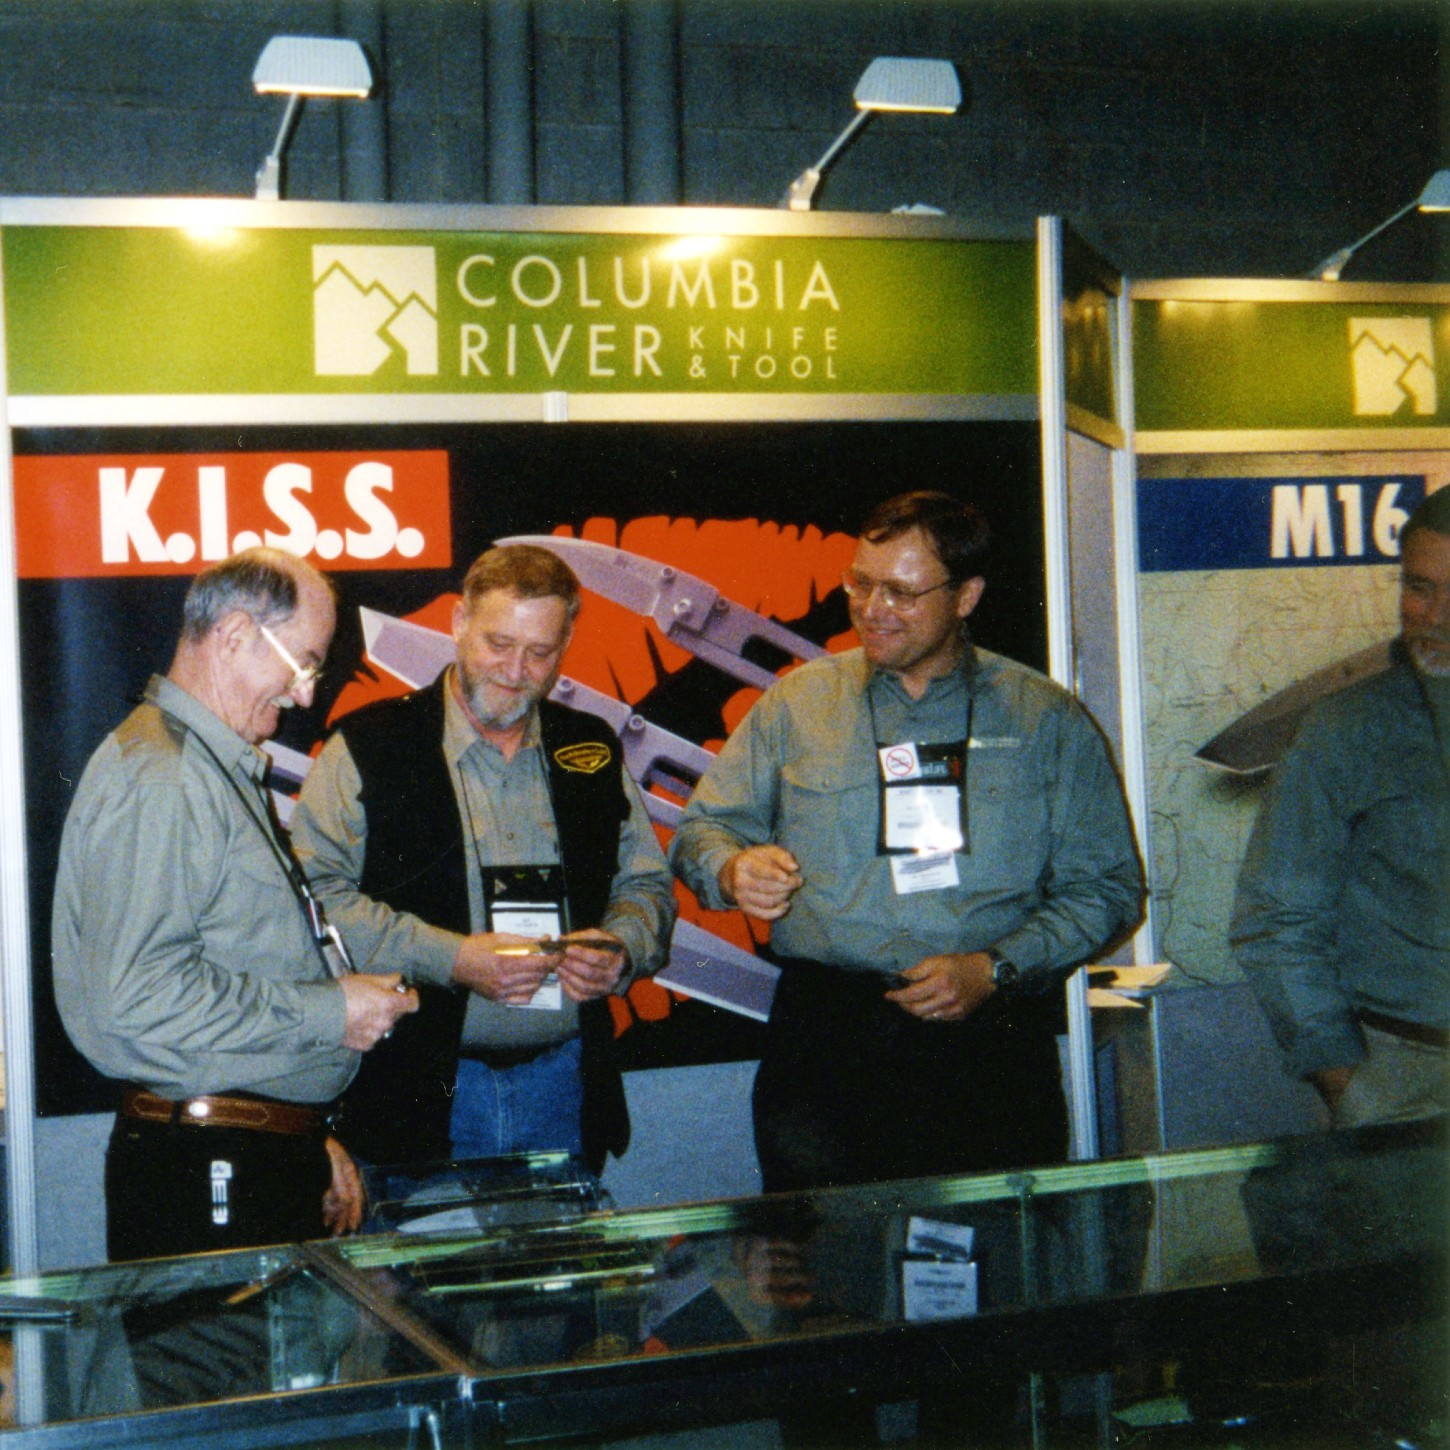 Ed Halligan, Kit Carson and Pat Crawford the Columbia River Knife & Tool booth